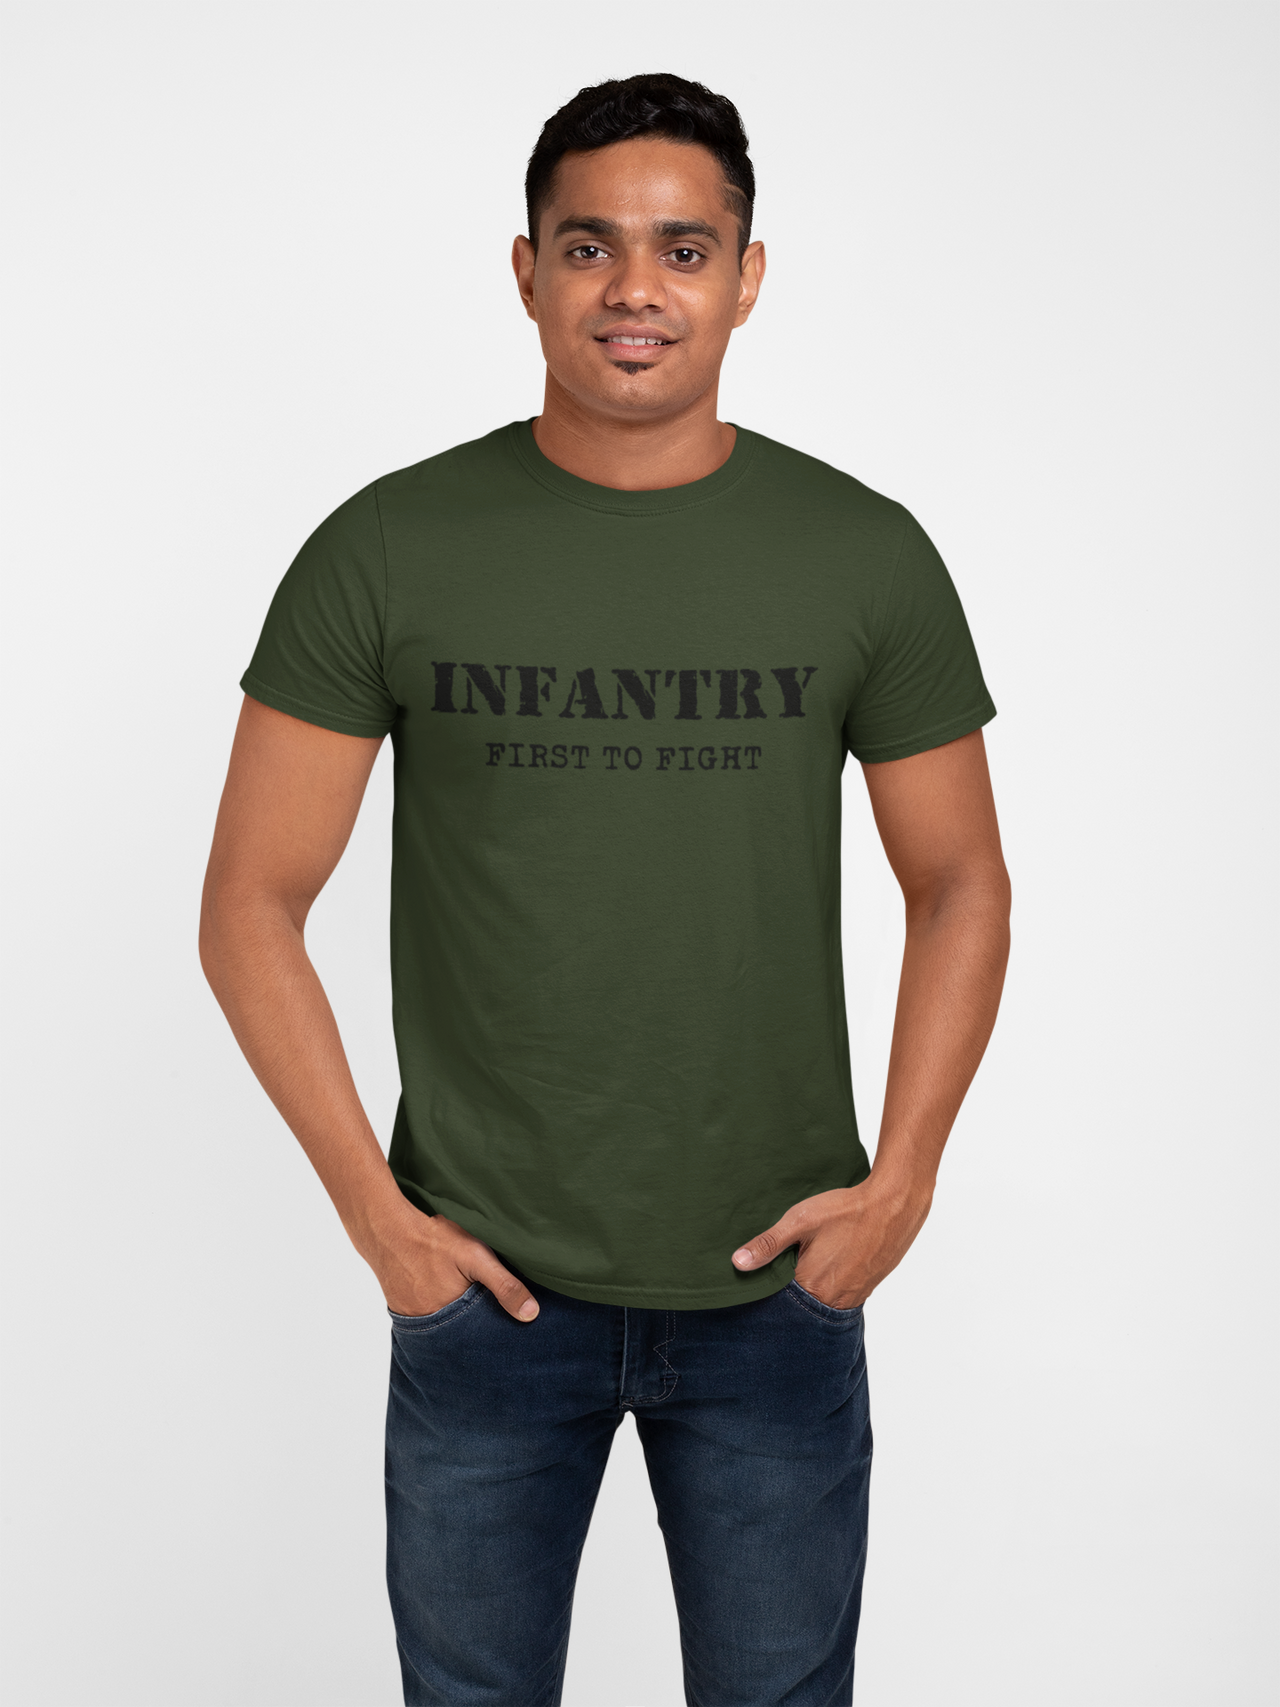 Infantry T-shirt - First to Fight (Men)